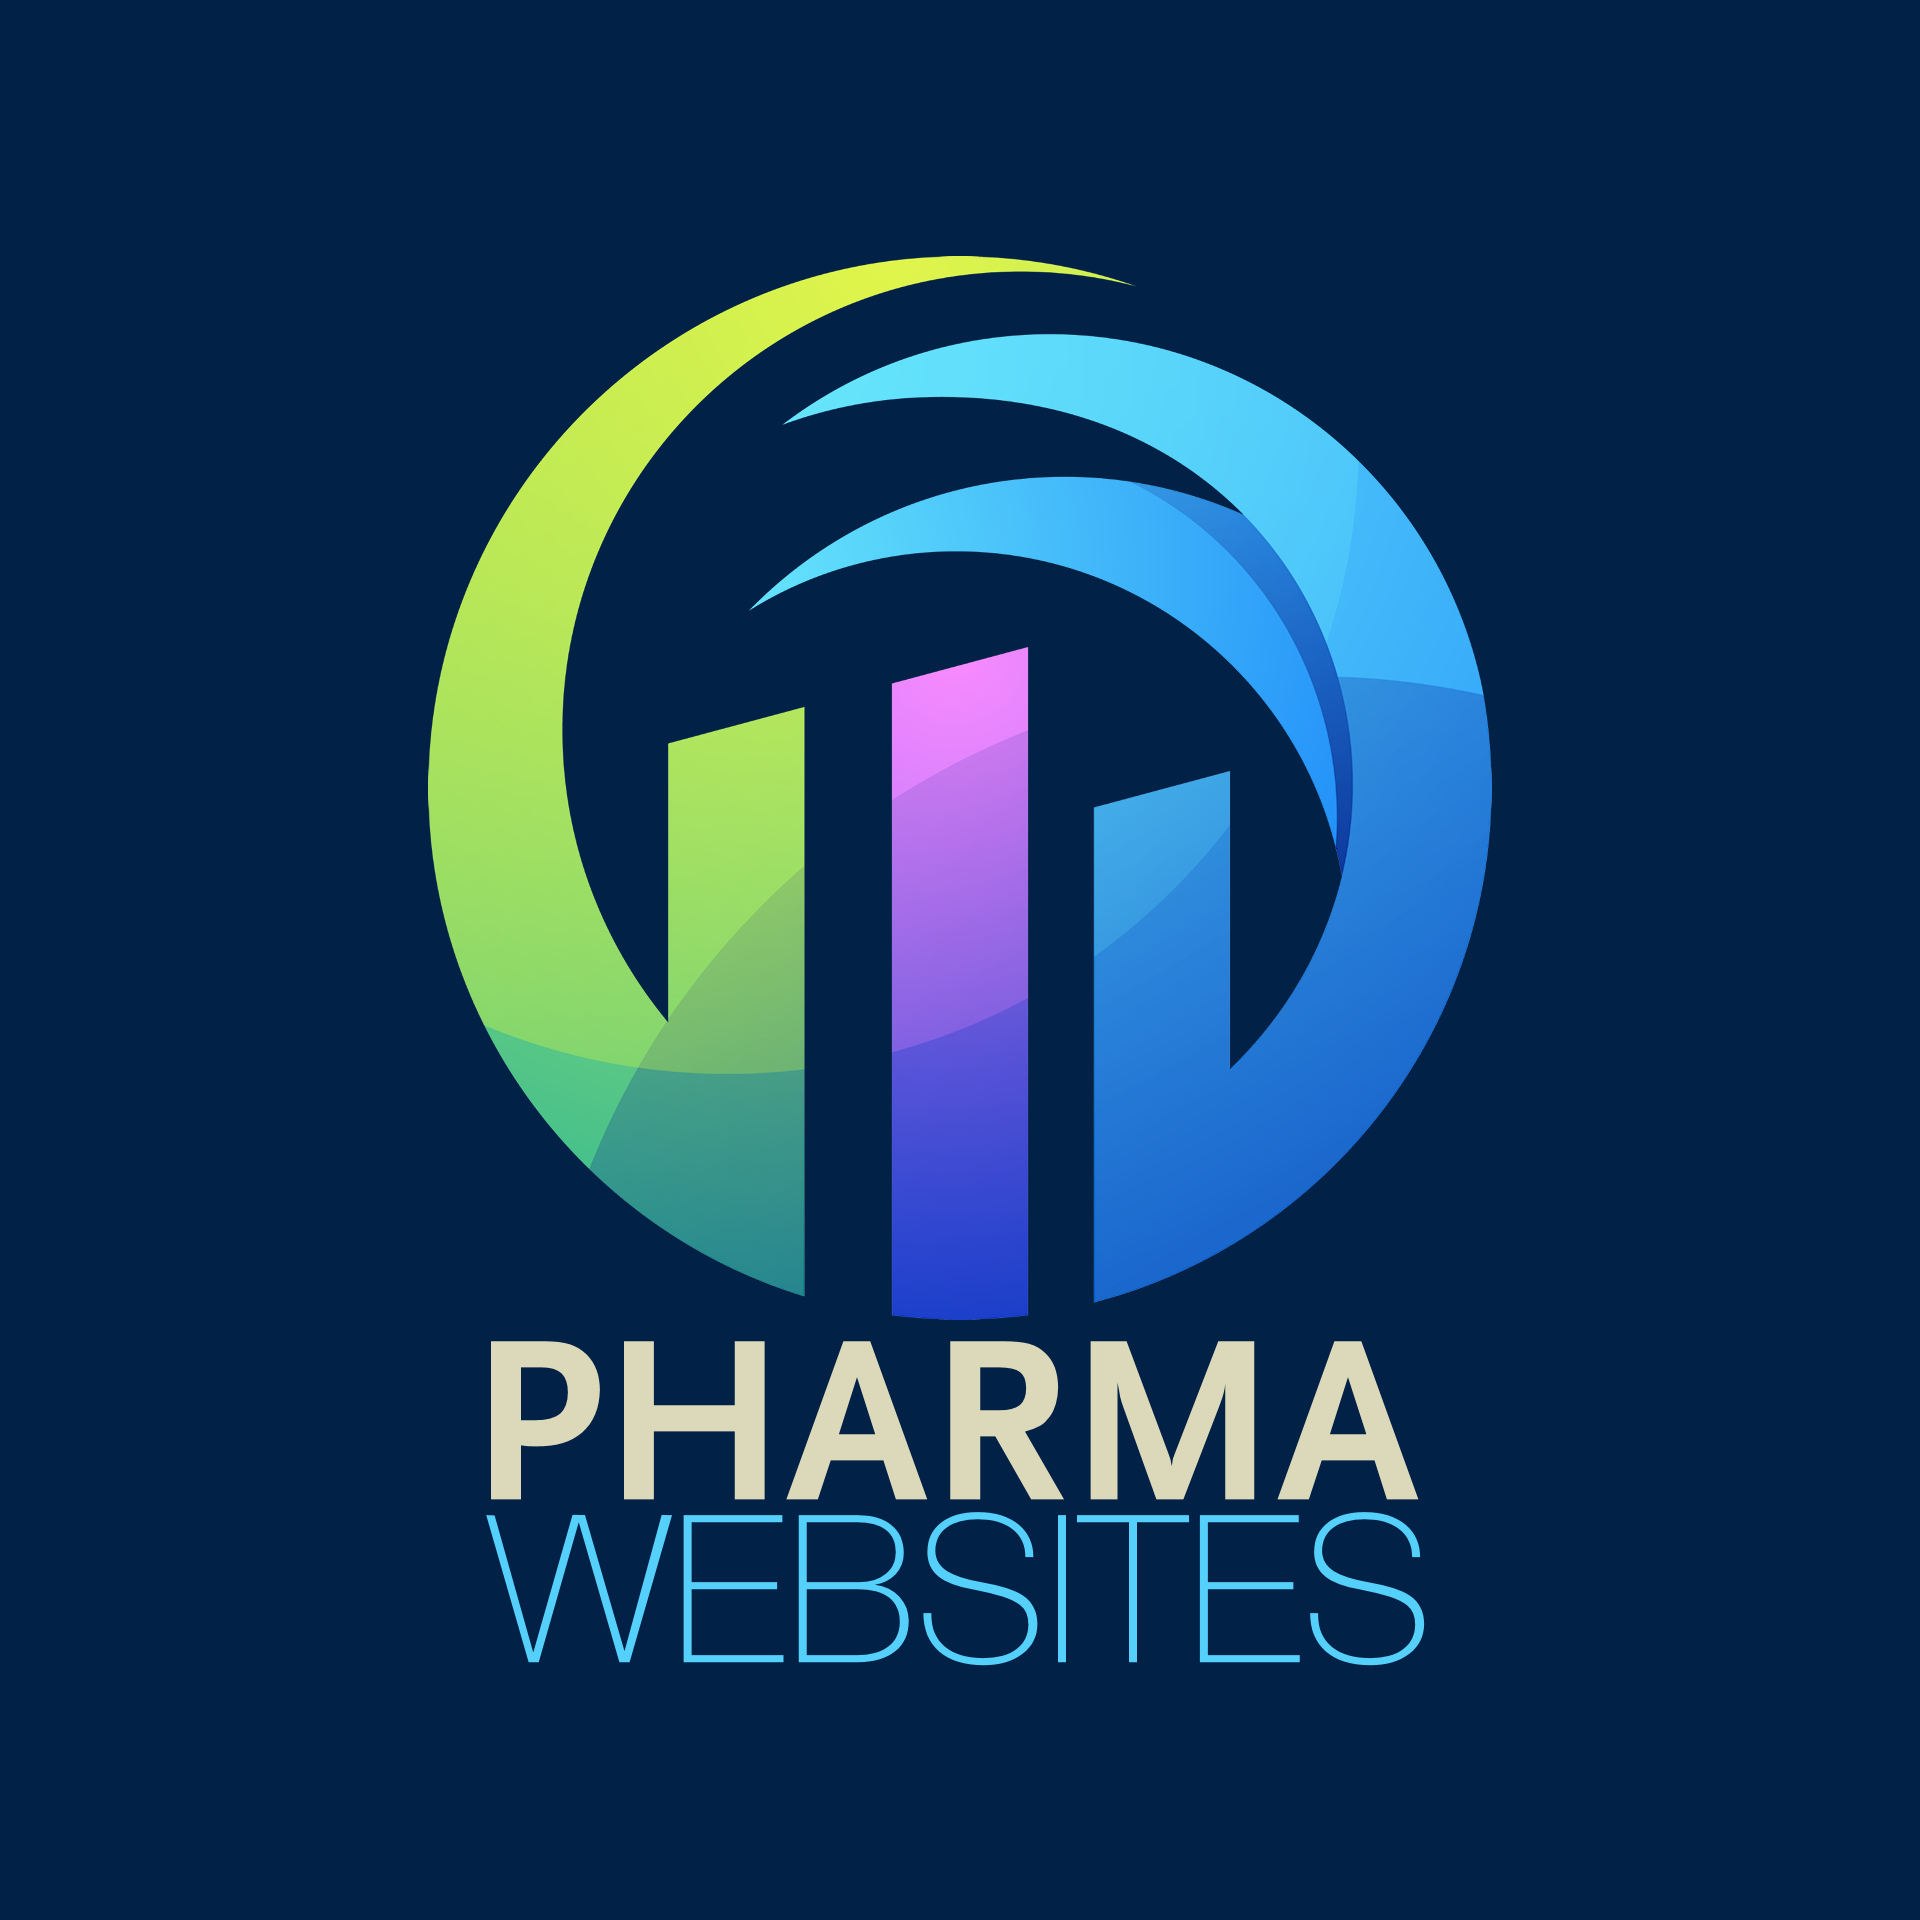 Professional web site design for Pharma, Biotech, MedTech, Digitial Health and HealthCare Proffessionals